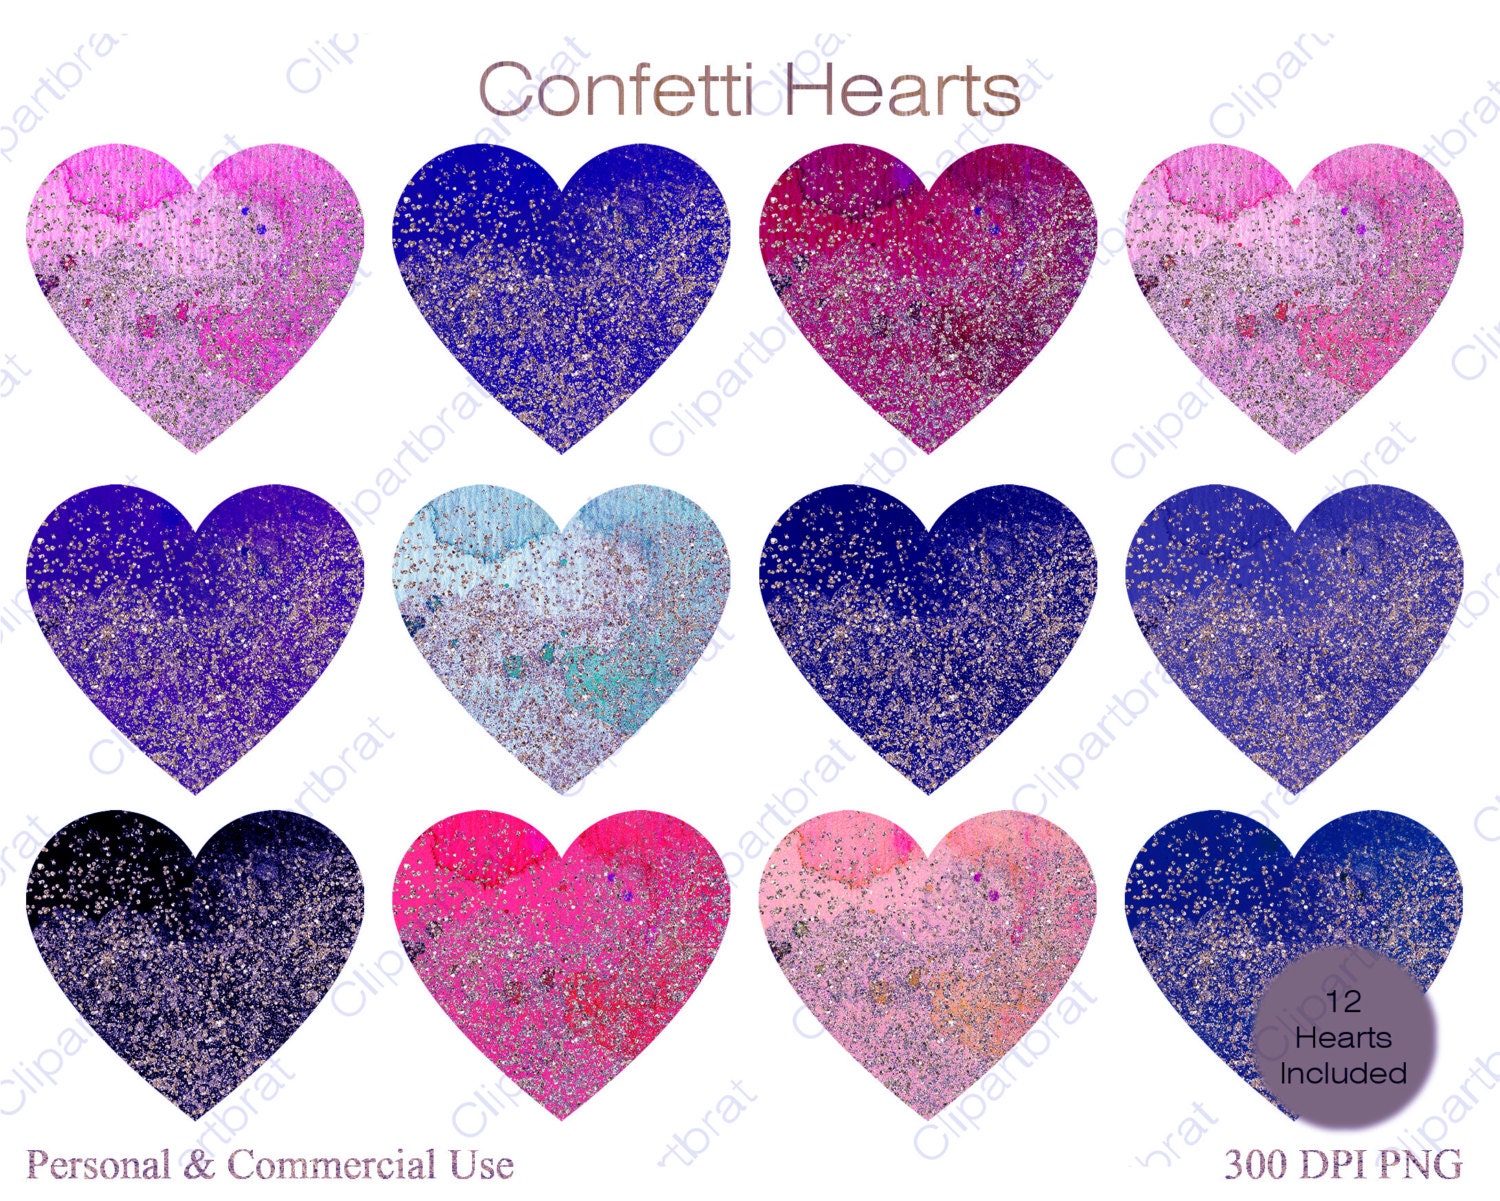 Download CONFETTI HEARTS Clipart for Commercial Use Clip Art ...